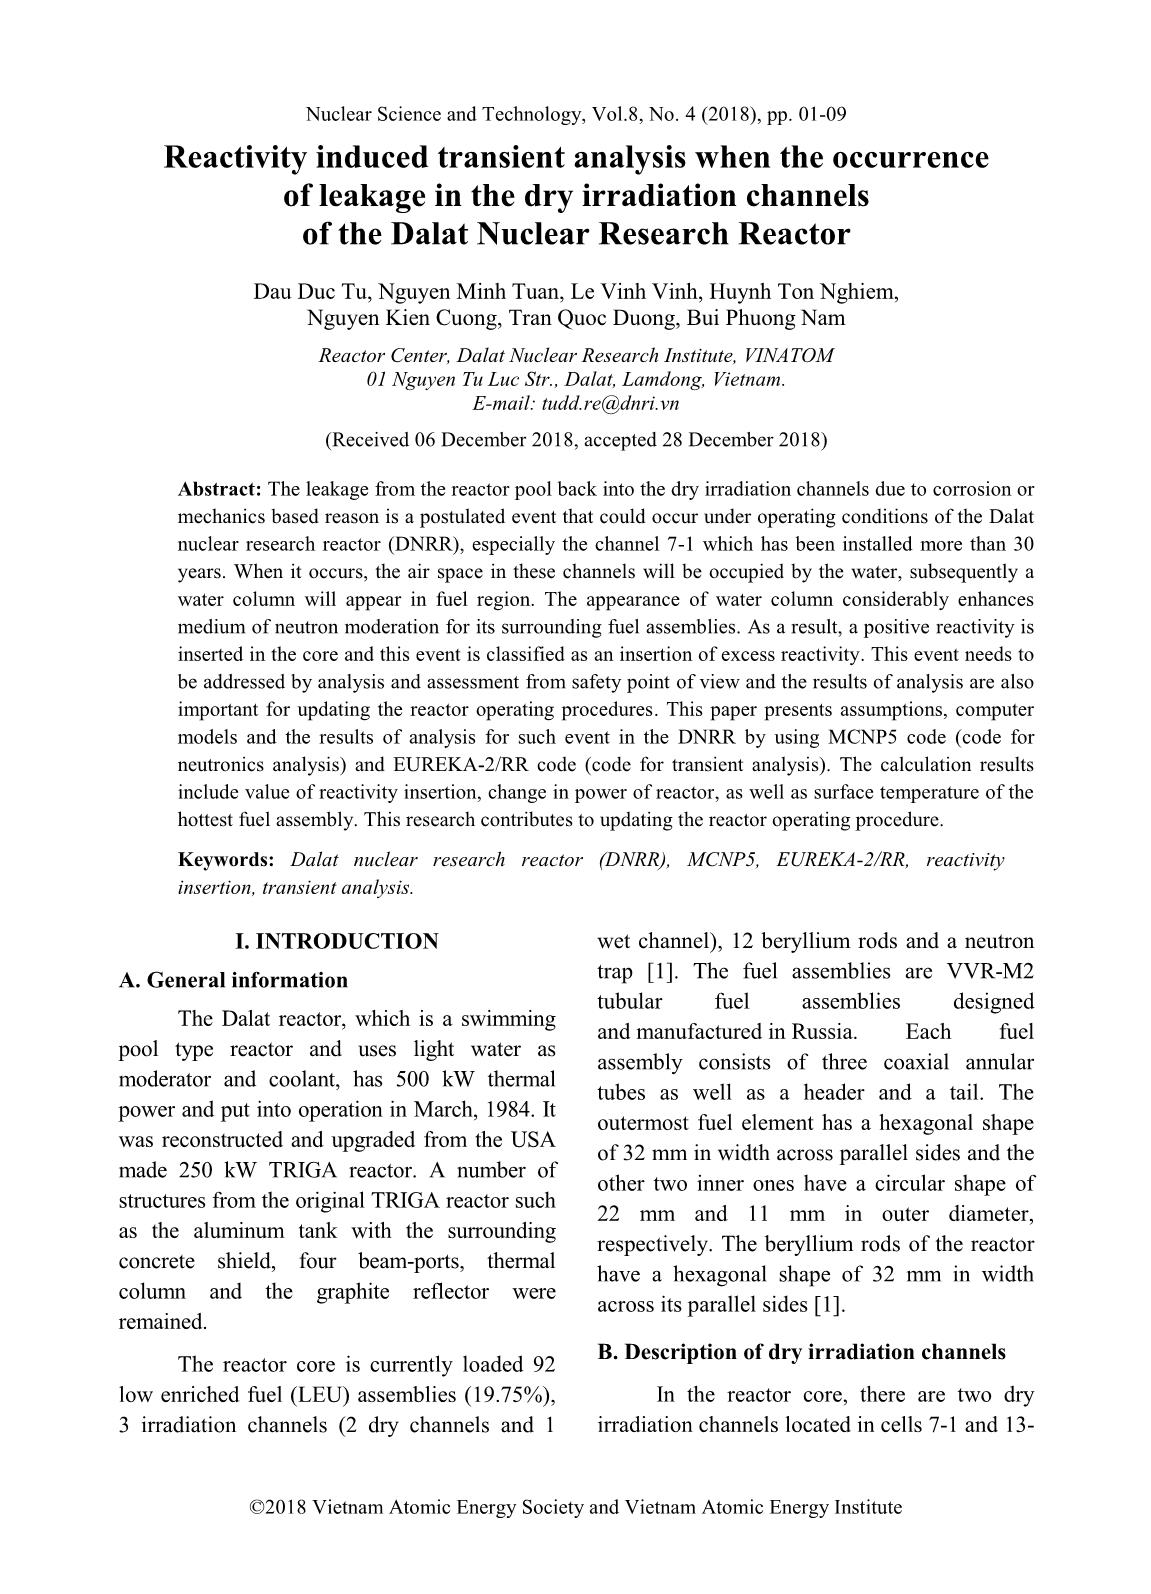 Nuclear Science and Technology - Volume 8, Number 4, December 2018 trang 4